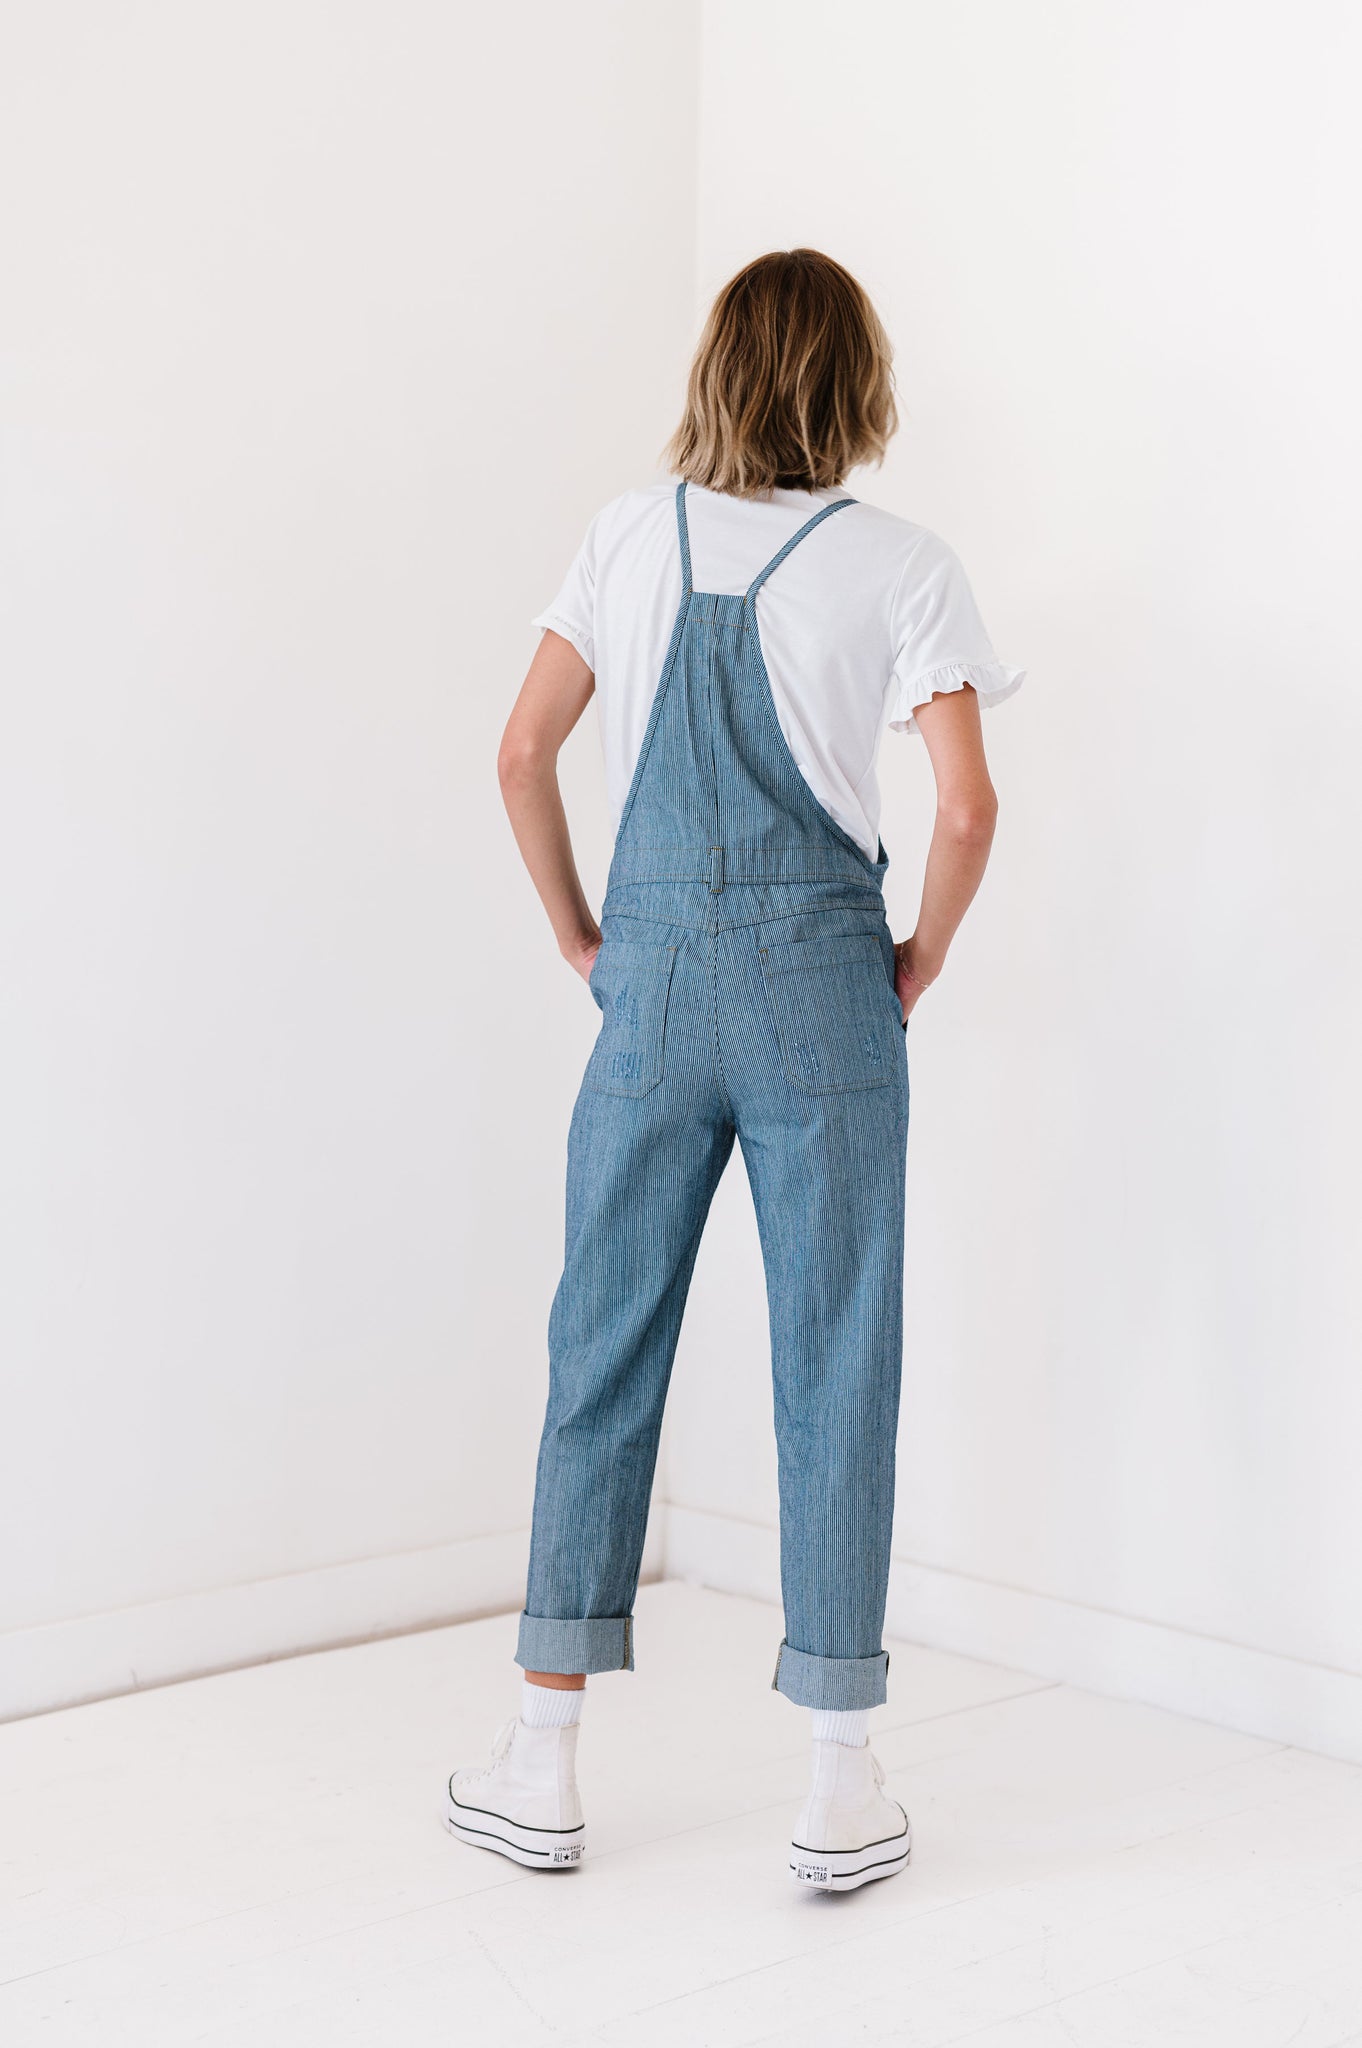 Buy Joules Rampling Denim Dungarees from the Joules online shop